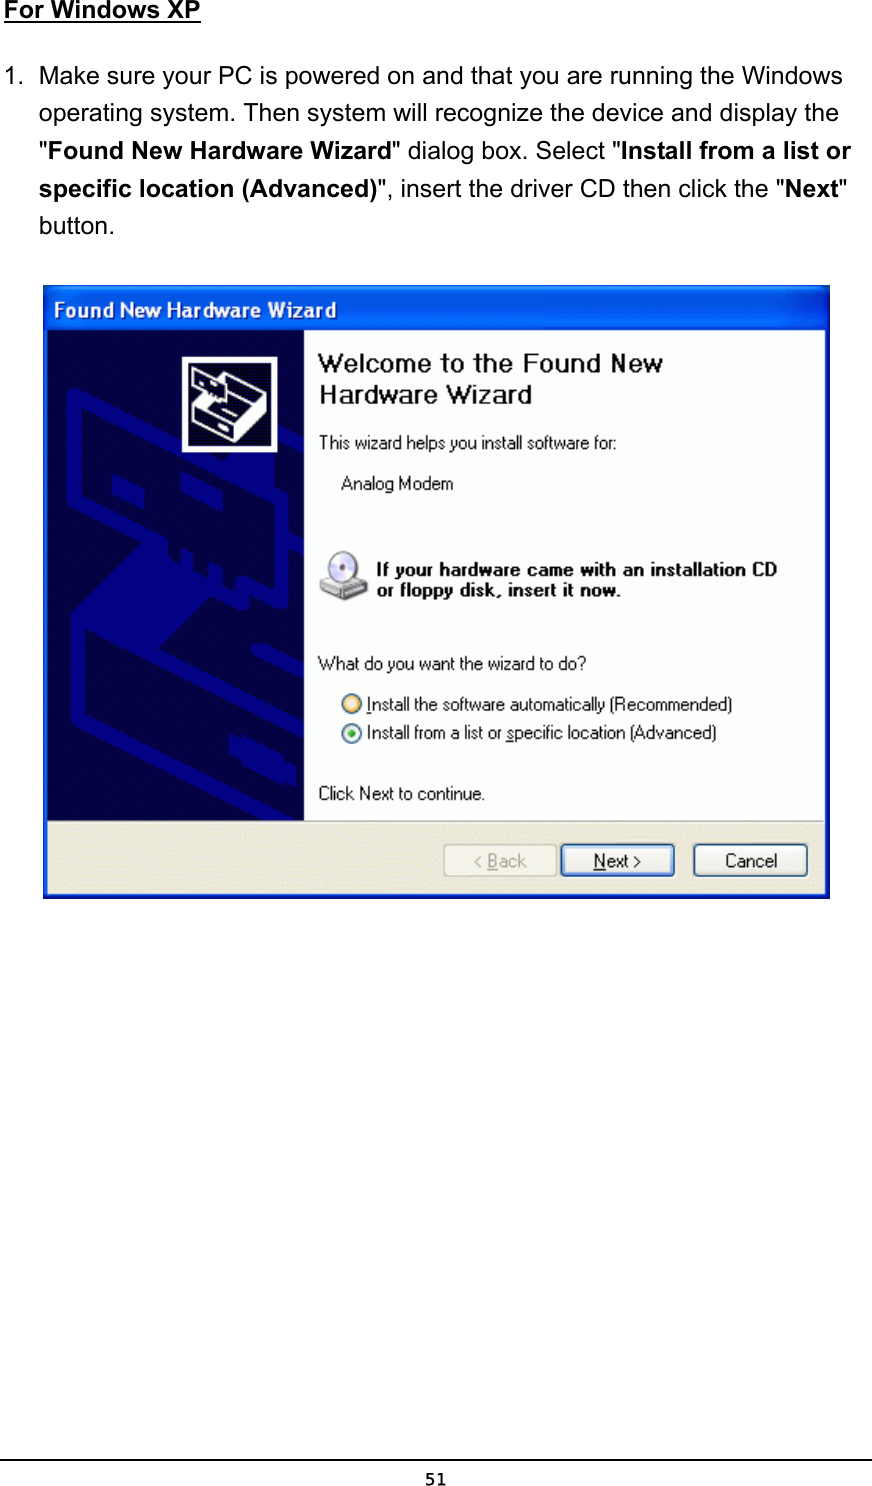   51For Windows XP 1.  Make sure your PC is powered on and that you are running the Windows operating system. Then system will recognize the device and display the &quot;Found New Hardware Wizard&quot; dialog box. Select &quot;Install from a list or specific location (Advanced)&quot;, insert the driver CD then click the &quot;Next&quot; button.  